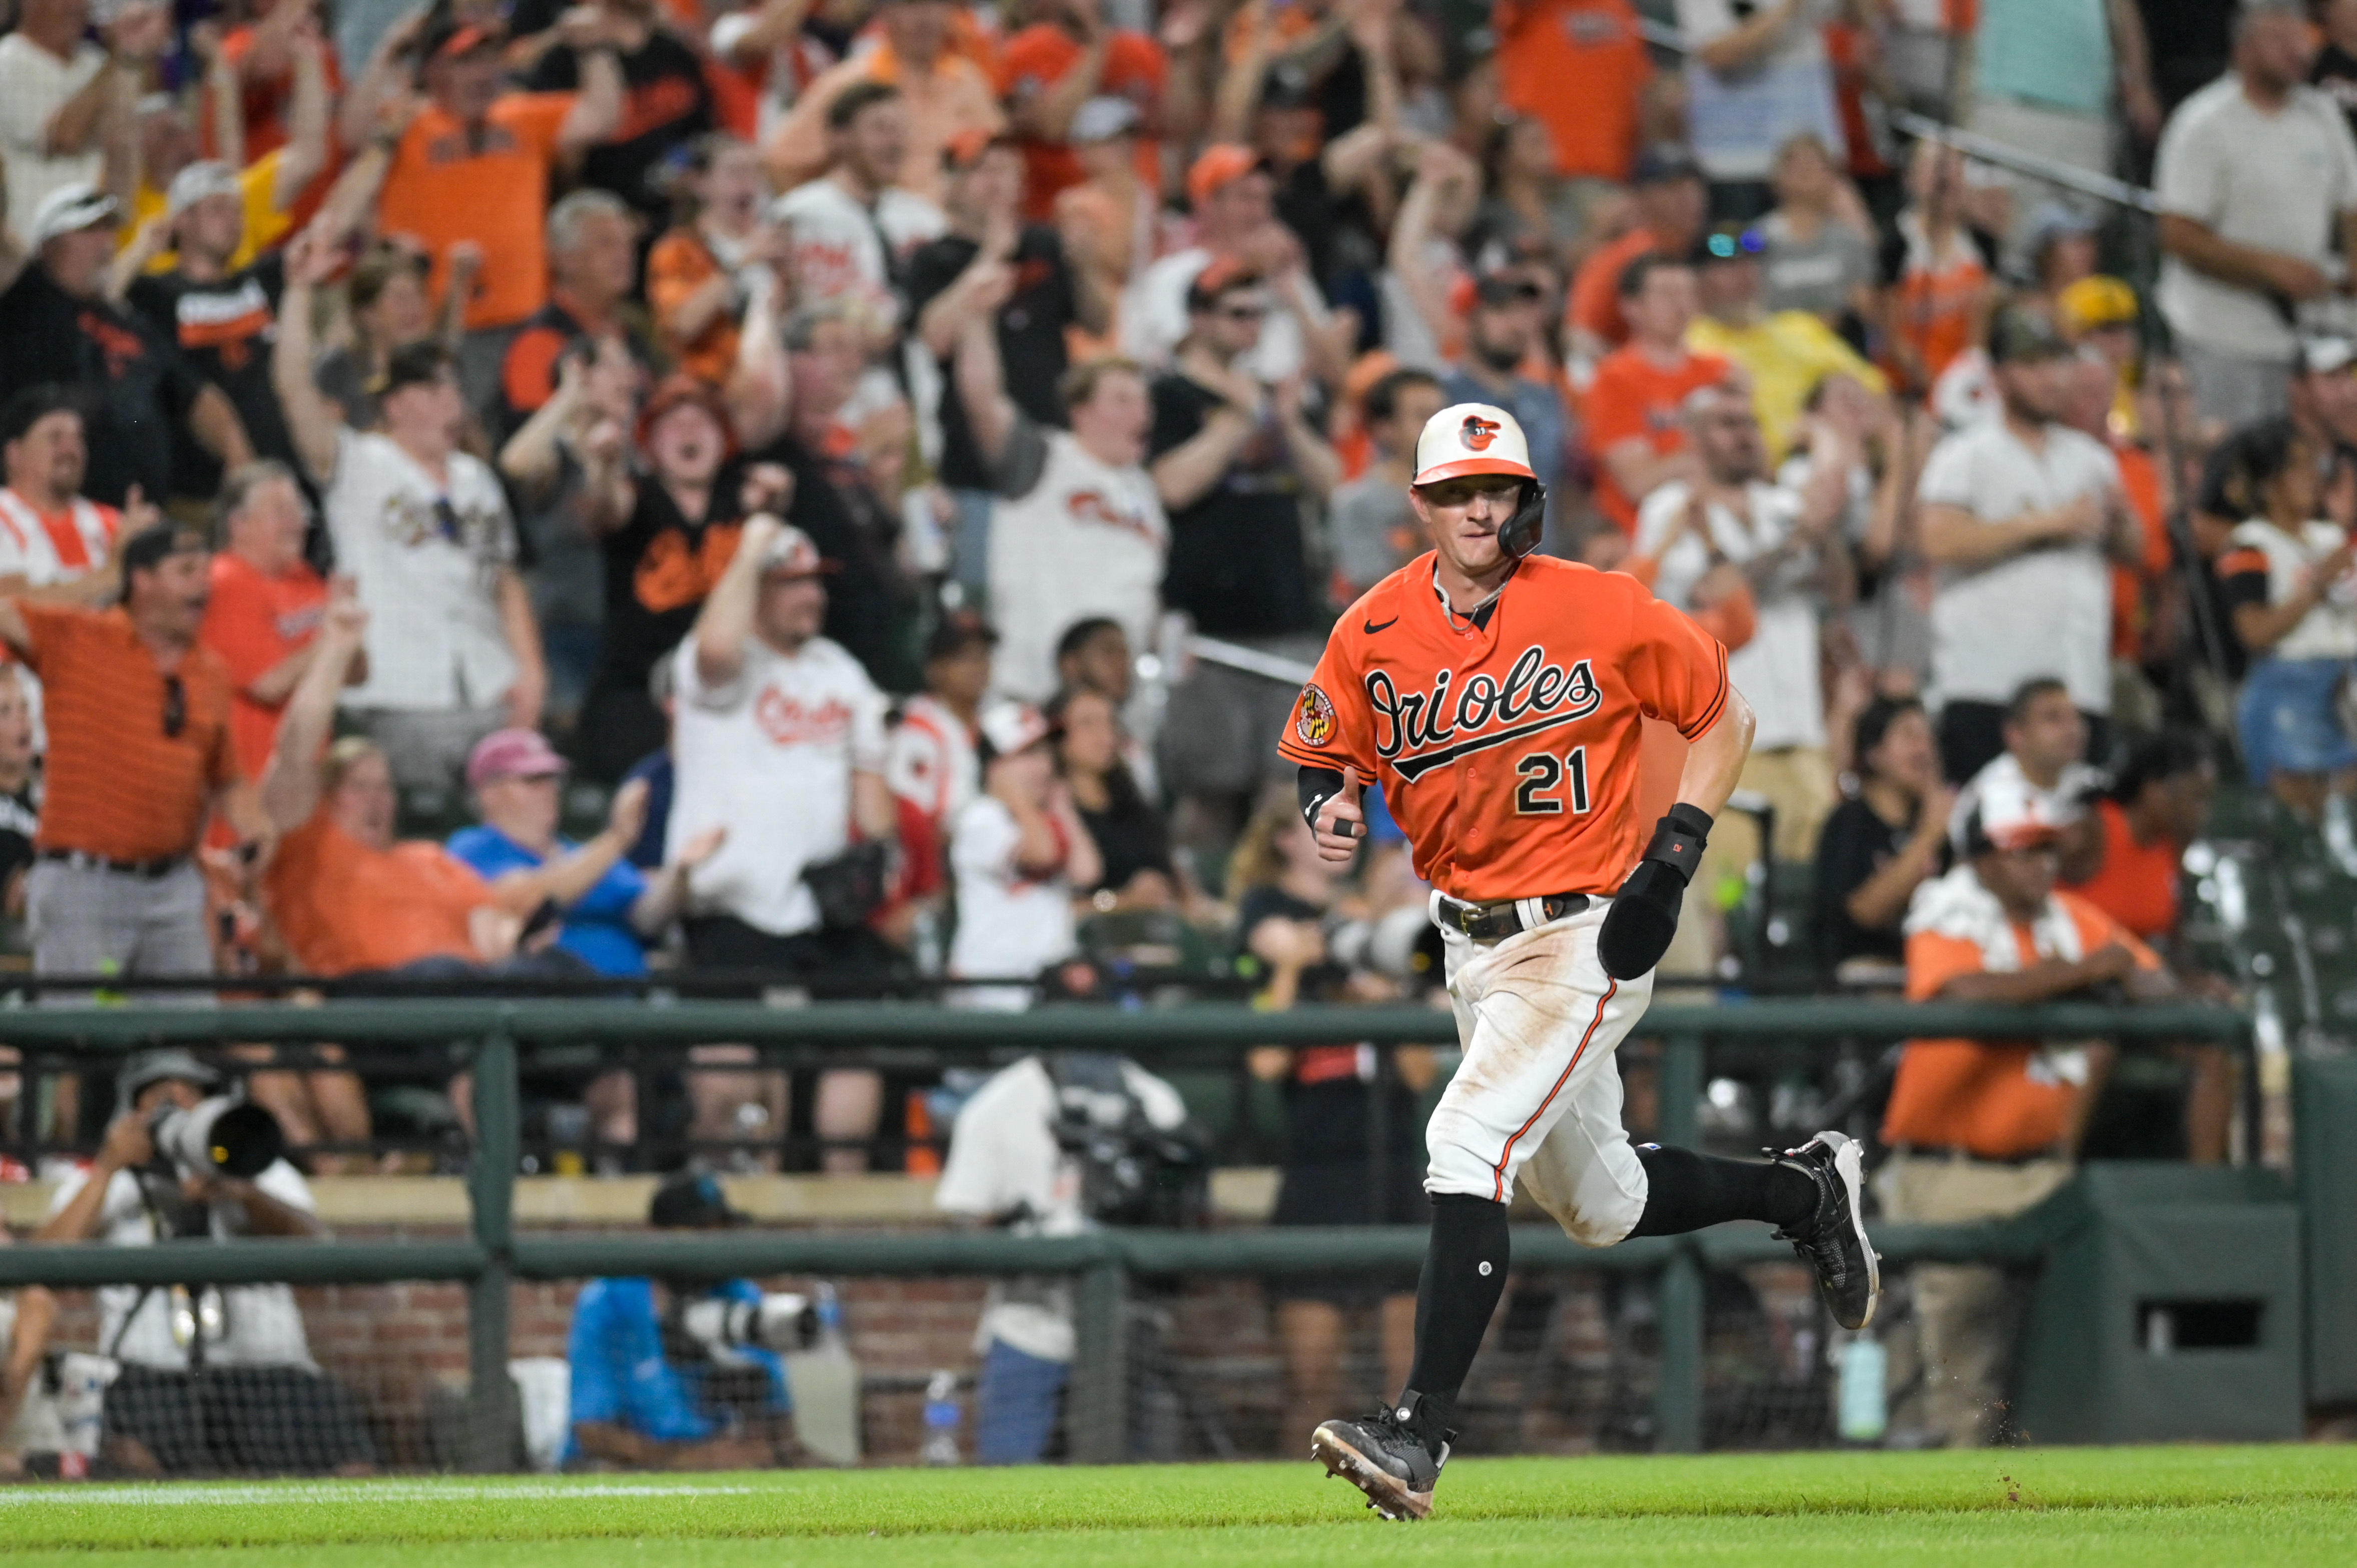 Orioles rally from 4-run deficit to beat Marlins 6-5 for 7th straight win